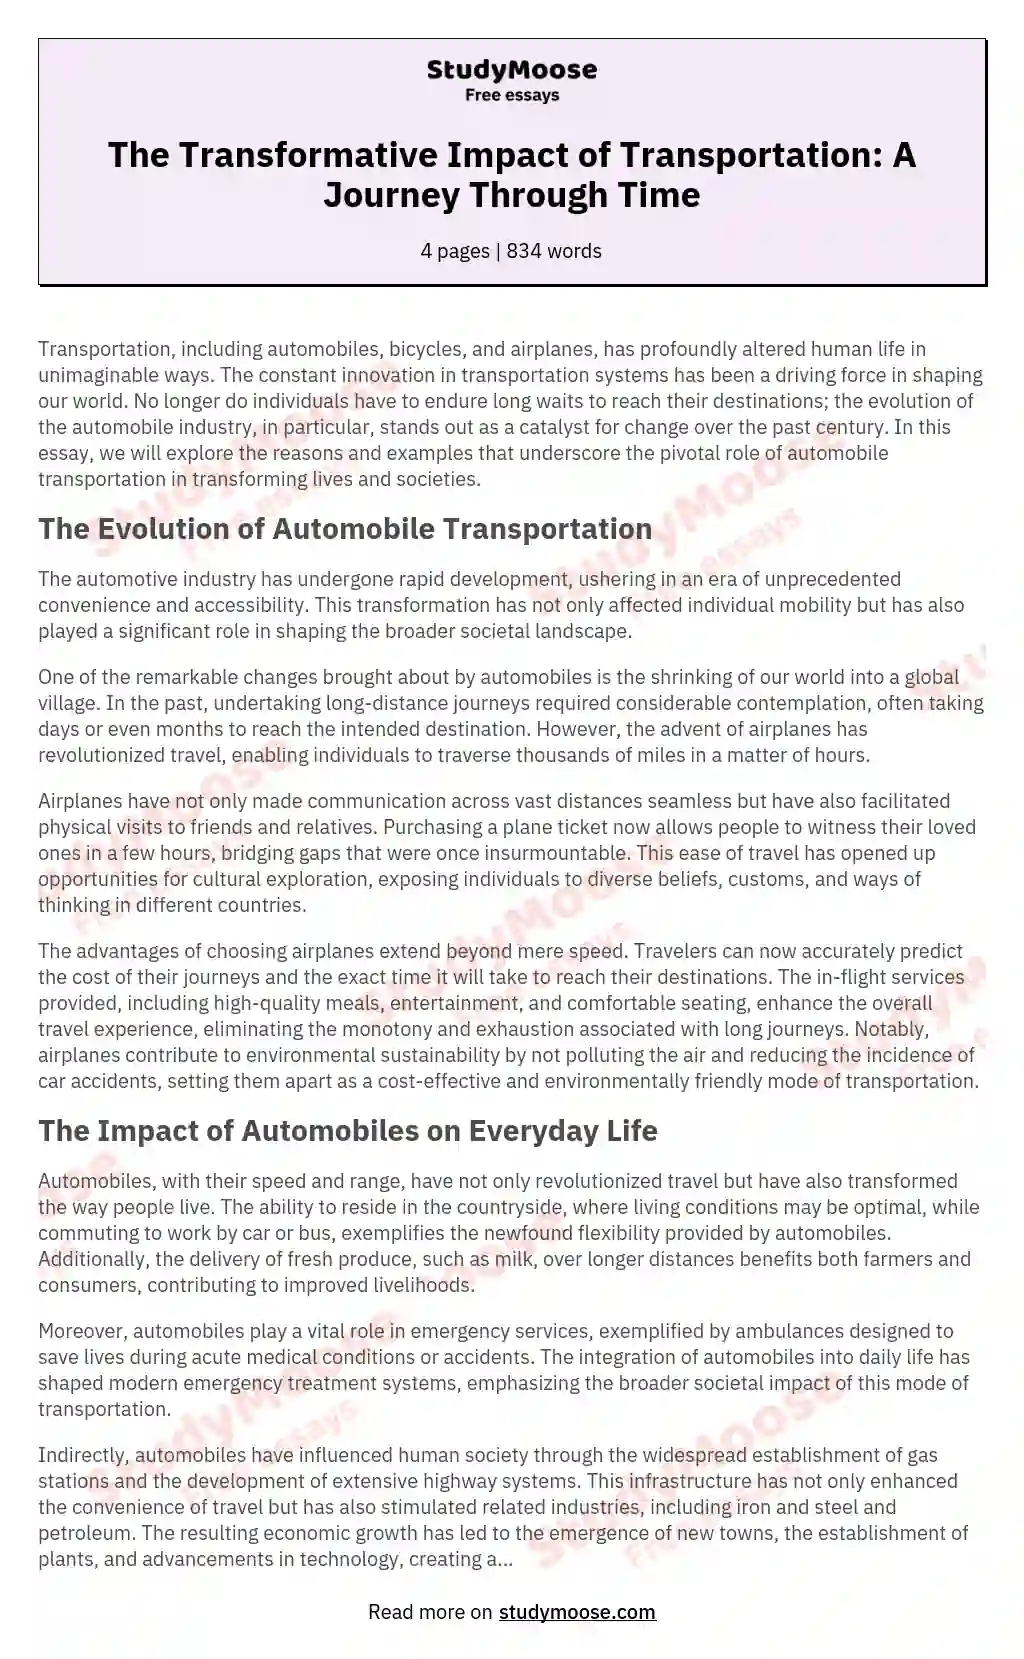 The Transformative Impact of Transportation: A Journey Through Time essay